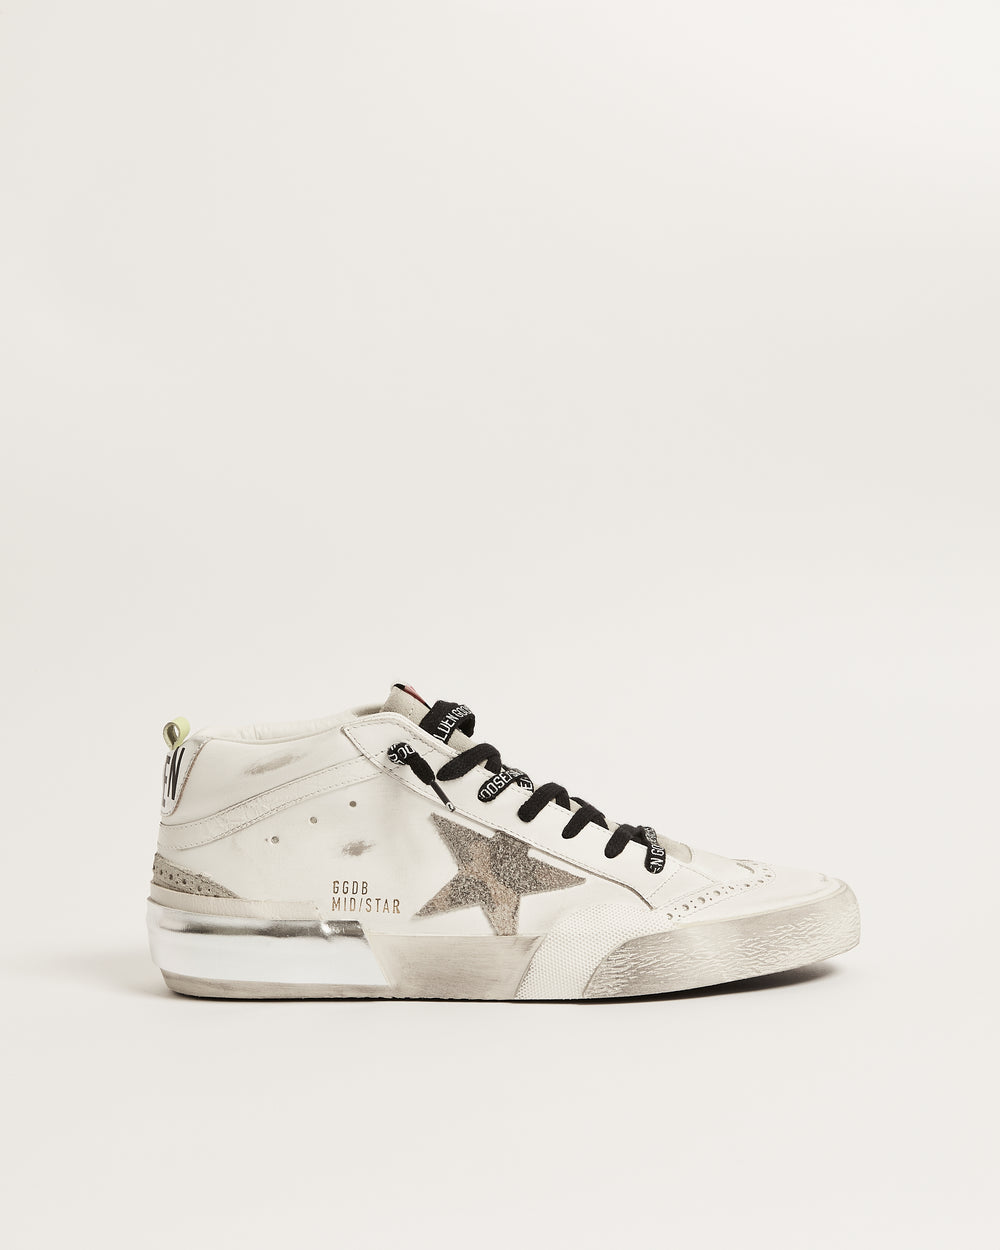 Mid Star in Leather w/ Camouflage Green Heel Tab and Suede Star